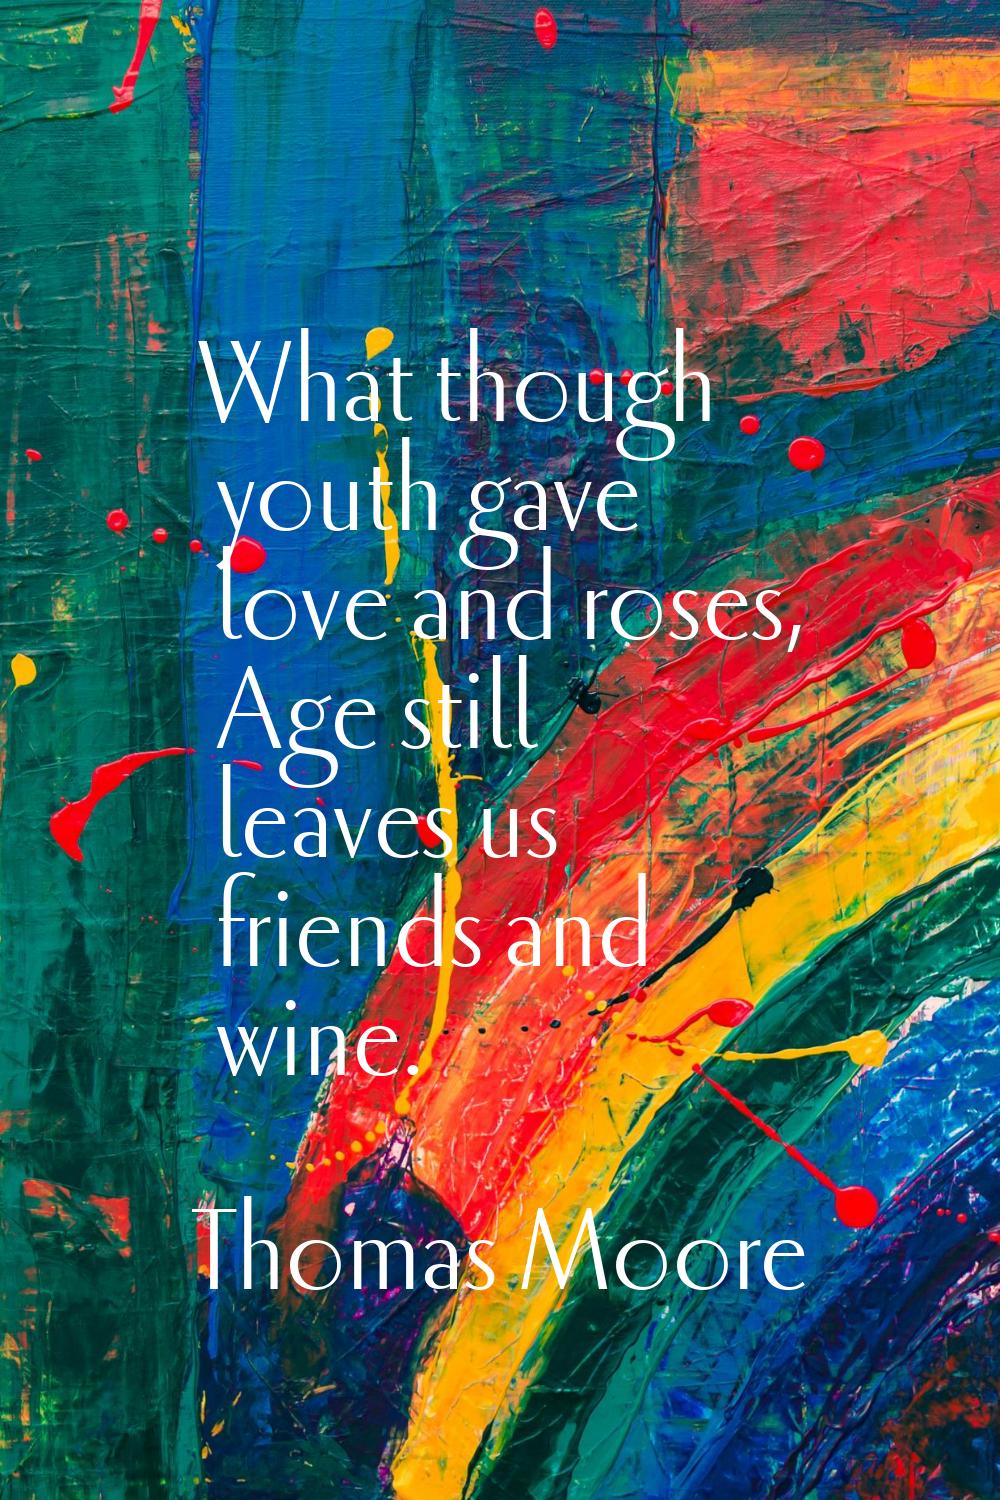 What though youth gave love and roses, Age still leaves us friends and wine.